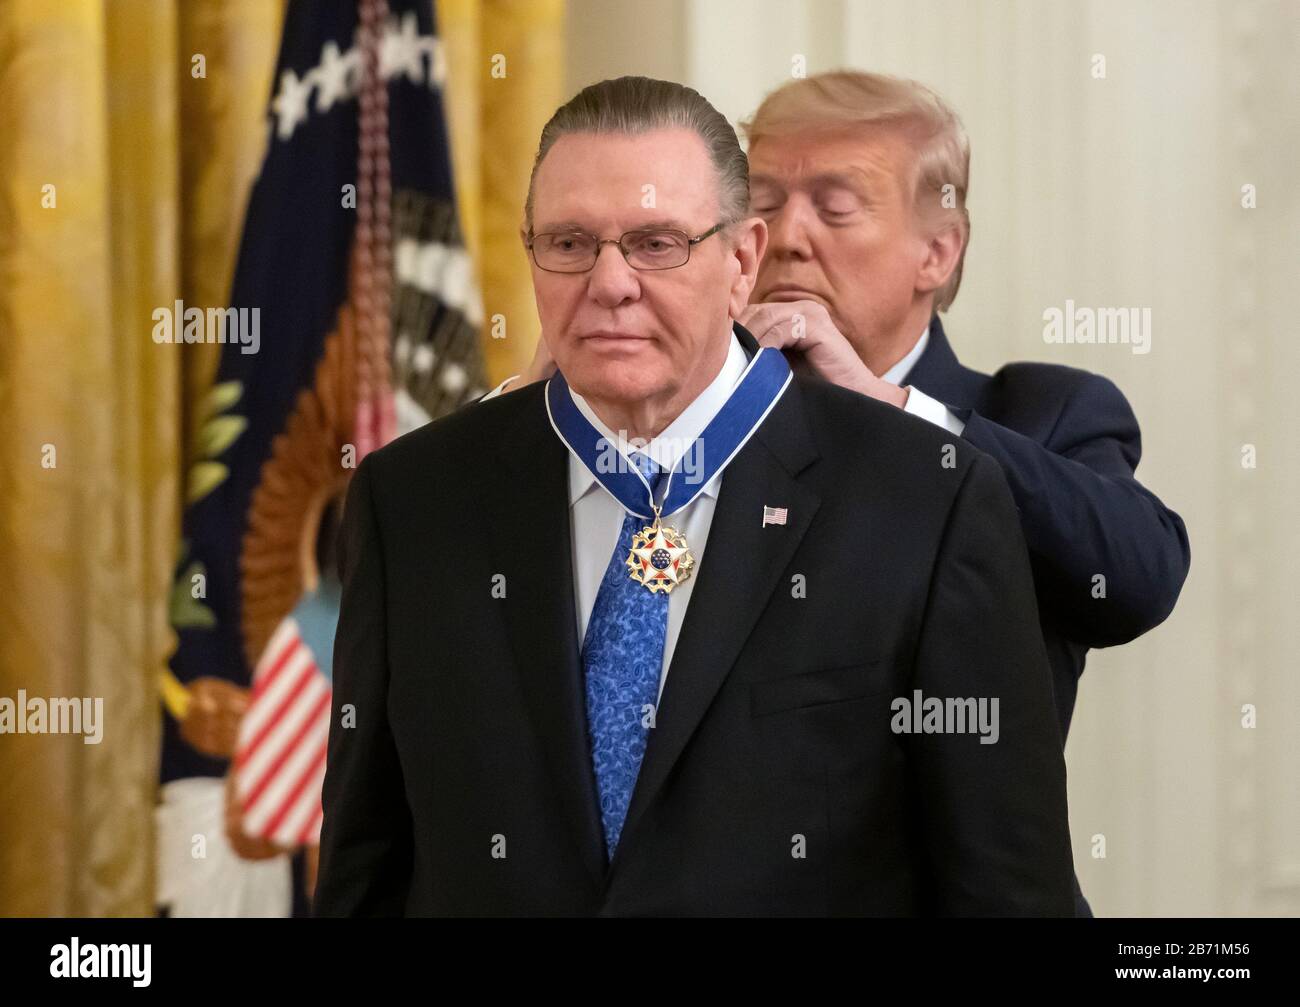 United States President Donald J. Trump, right, presents the Presidential Medal of Freedom to US Army General John M. "Jack" Keane (retired), left, during a ceremony in the East Room of the White House in Washington, DC on Tuesday, March 10, 2020. Keane is a former Vice Chief of Staff of the US Army and is a Fox News national security analyst.Credit: Ron Sachs/CNP /MediaPunch Stock Photo